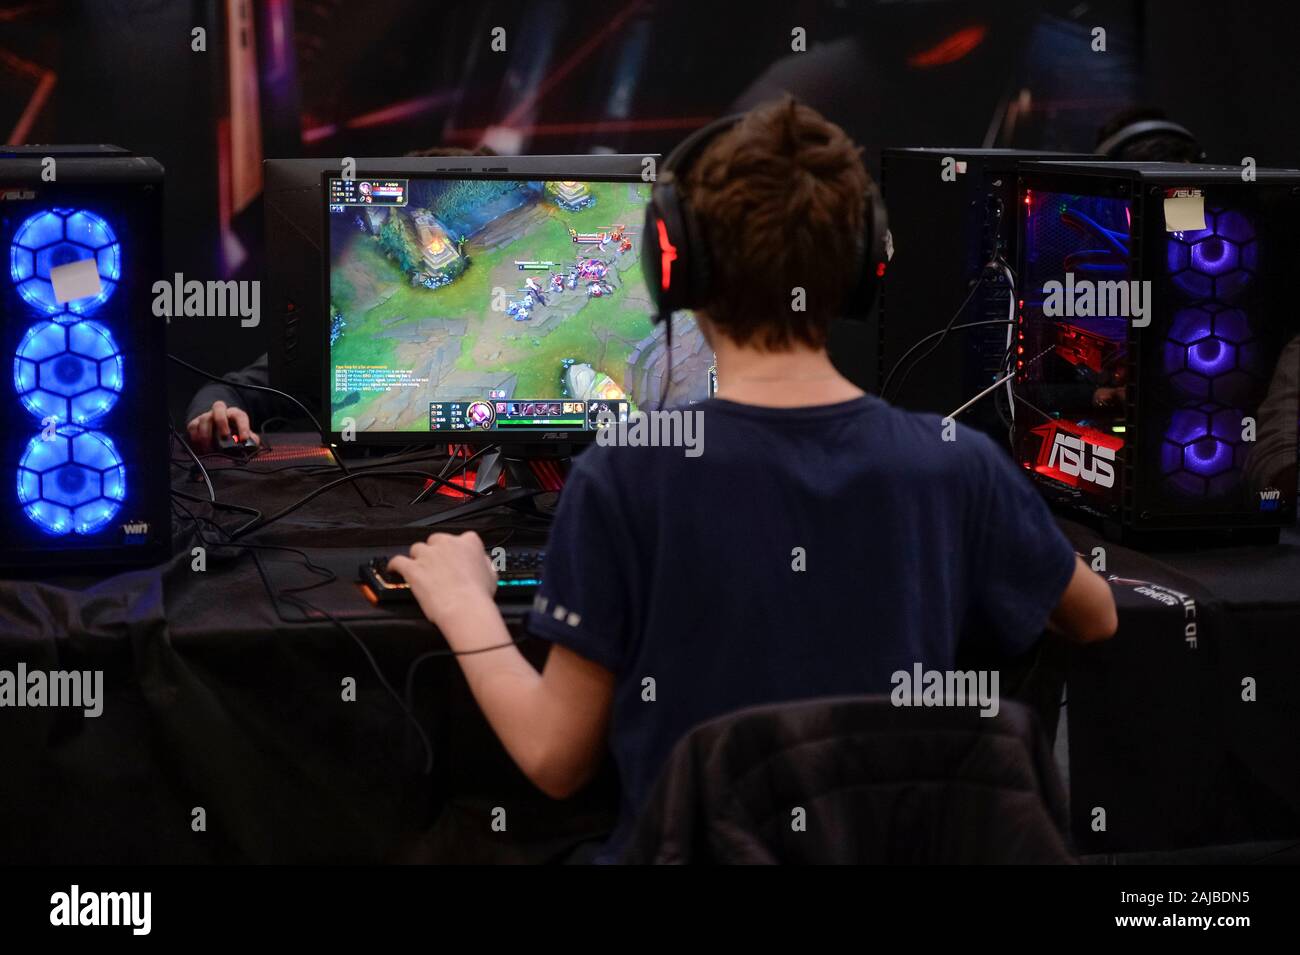 Turin, Italy - 15 April, 2018: A person plays 'League of Legends' video game during the 'Torino Comics' fair. Credit: Nicolò Campo/Alamy Live News Stock Photo